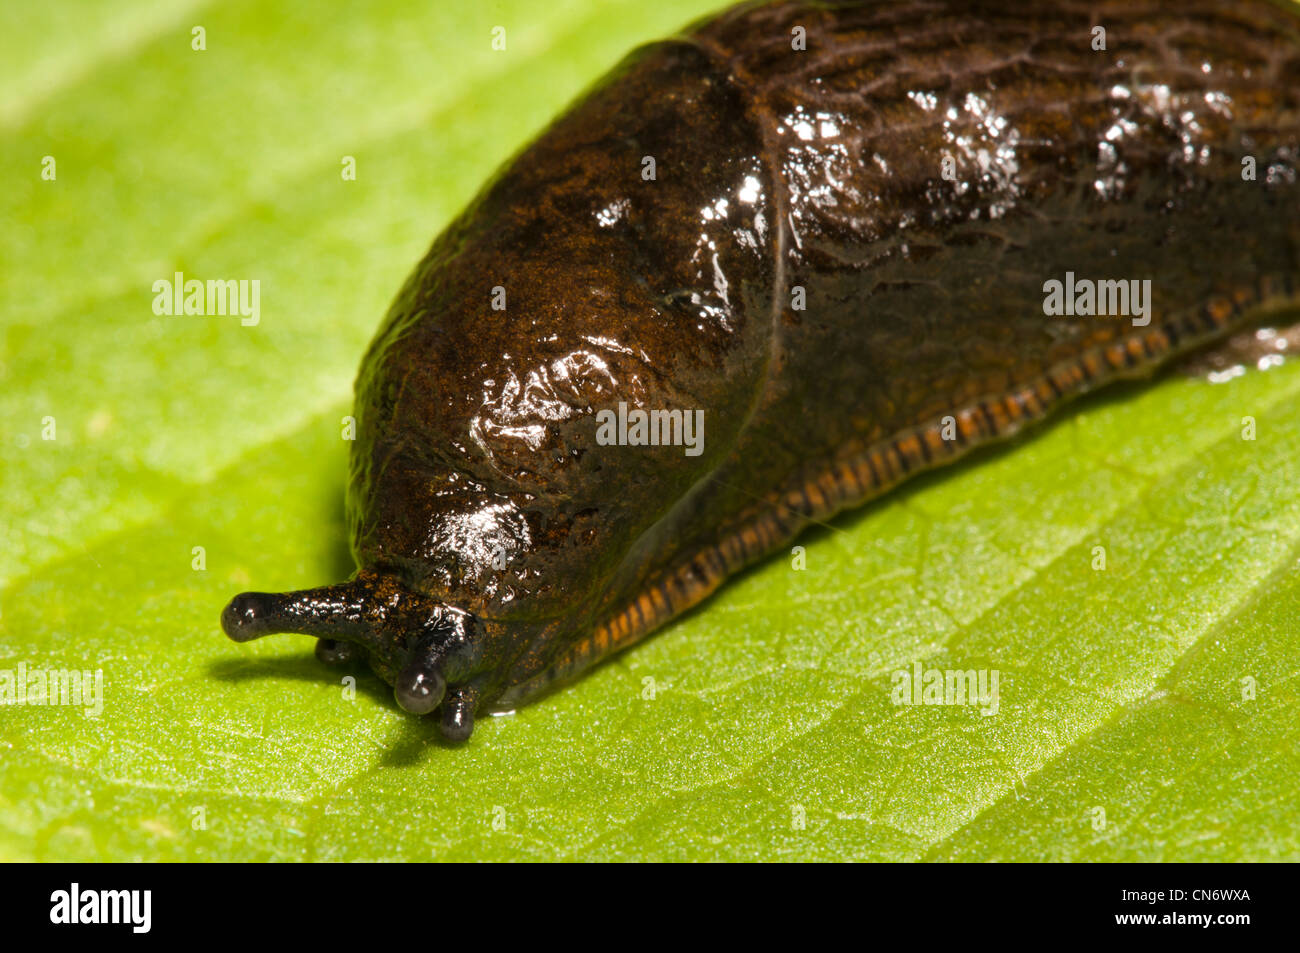 A black slug (Arion ater agg.) in its reddish brown form, on a leaf at Crossness Nature Reserve, Bexley, Kent. June. Stock Photo